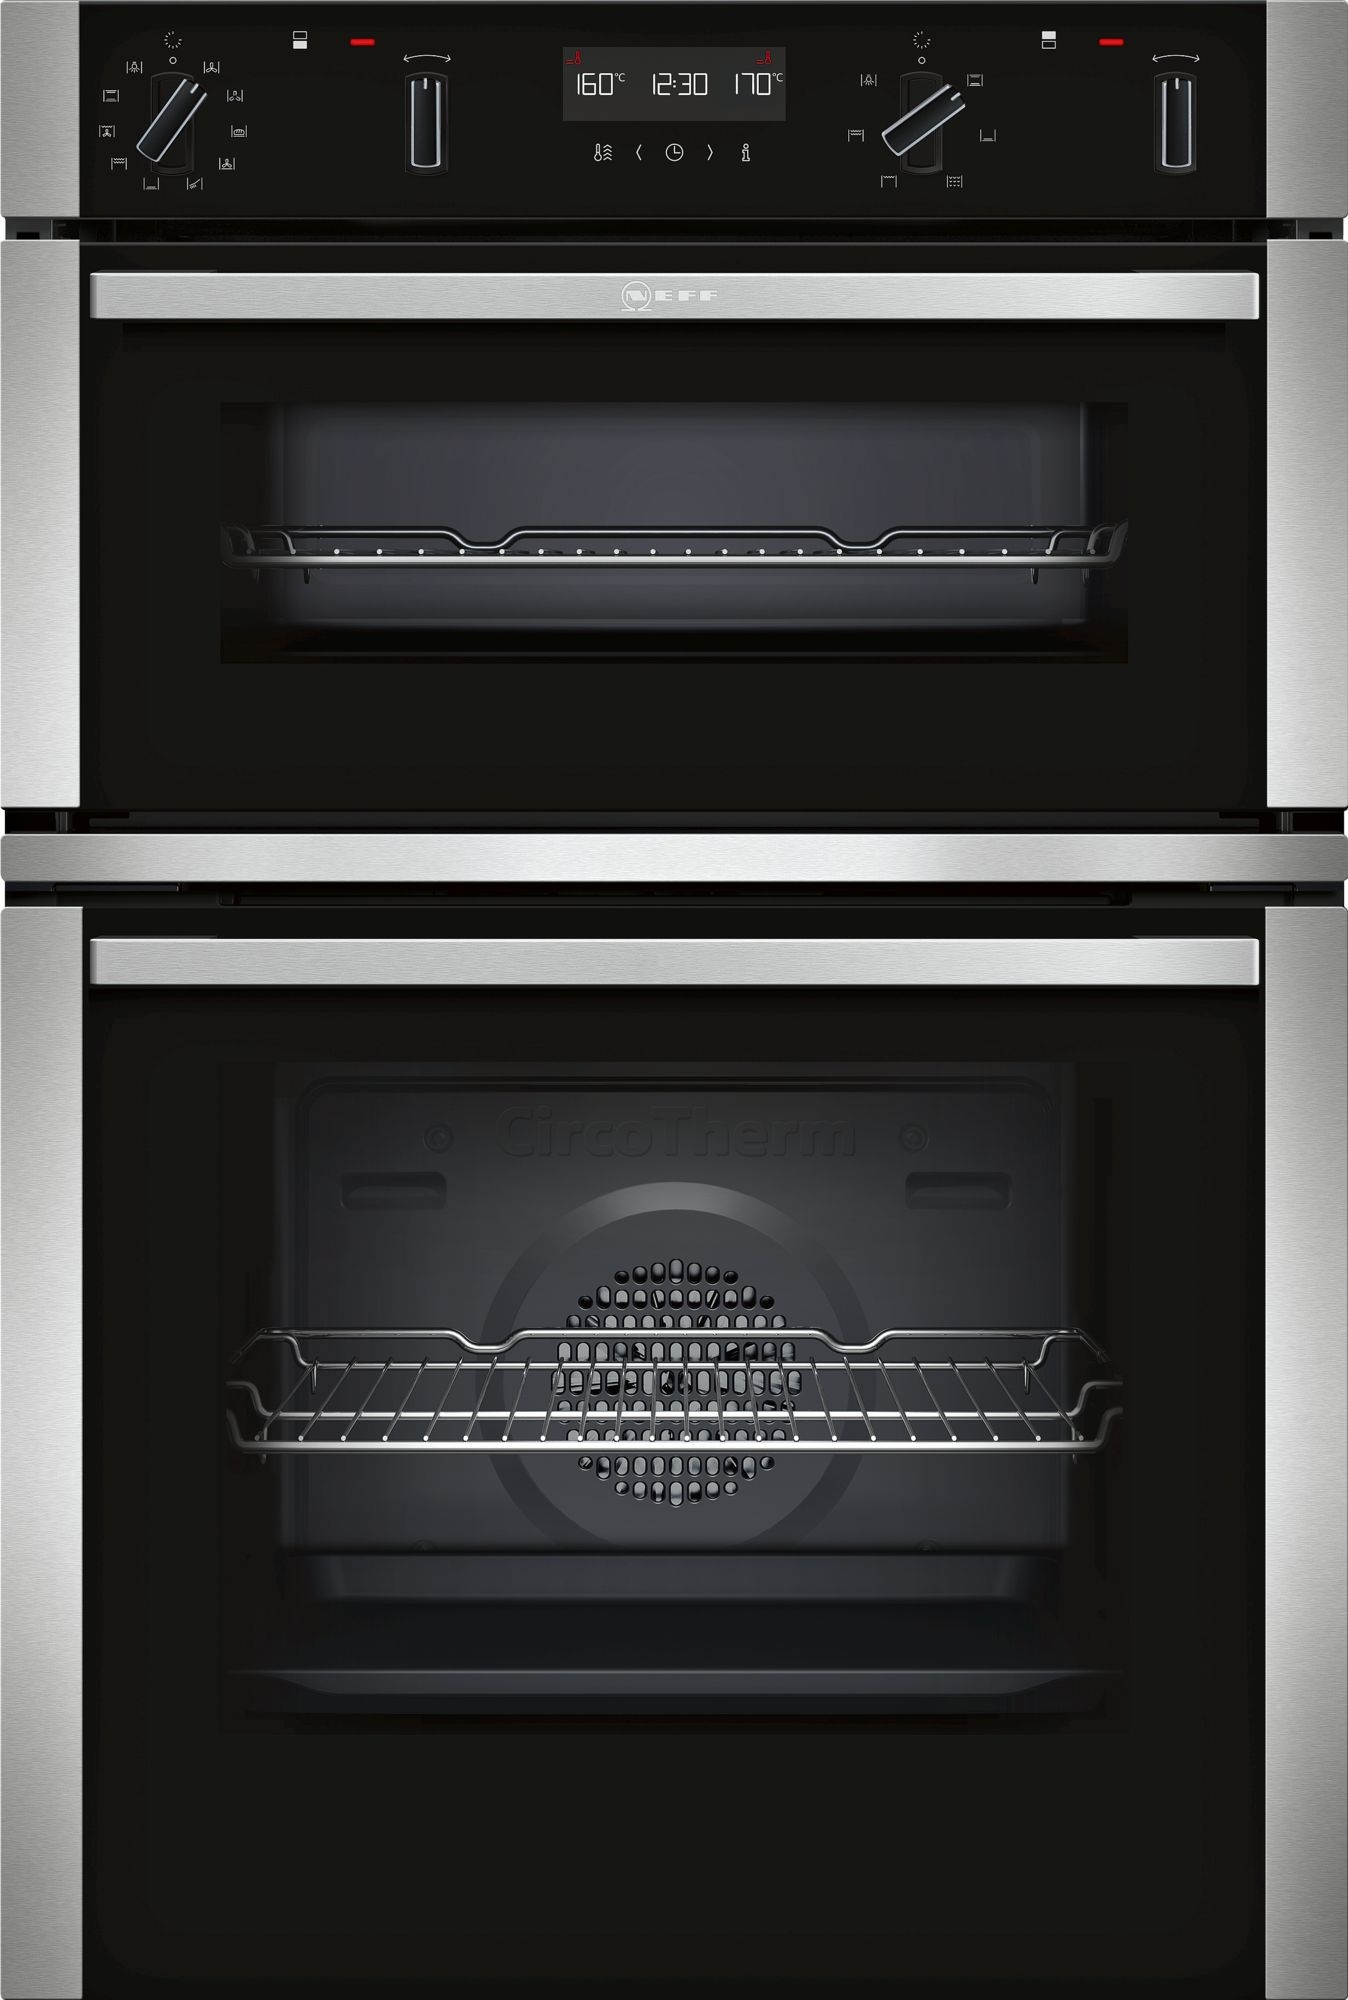 *Display Model* Neff U2ACM7HN0B Pyrolytic Integrated Double Oven-Stainless Steel 